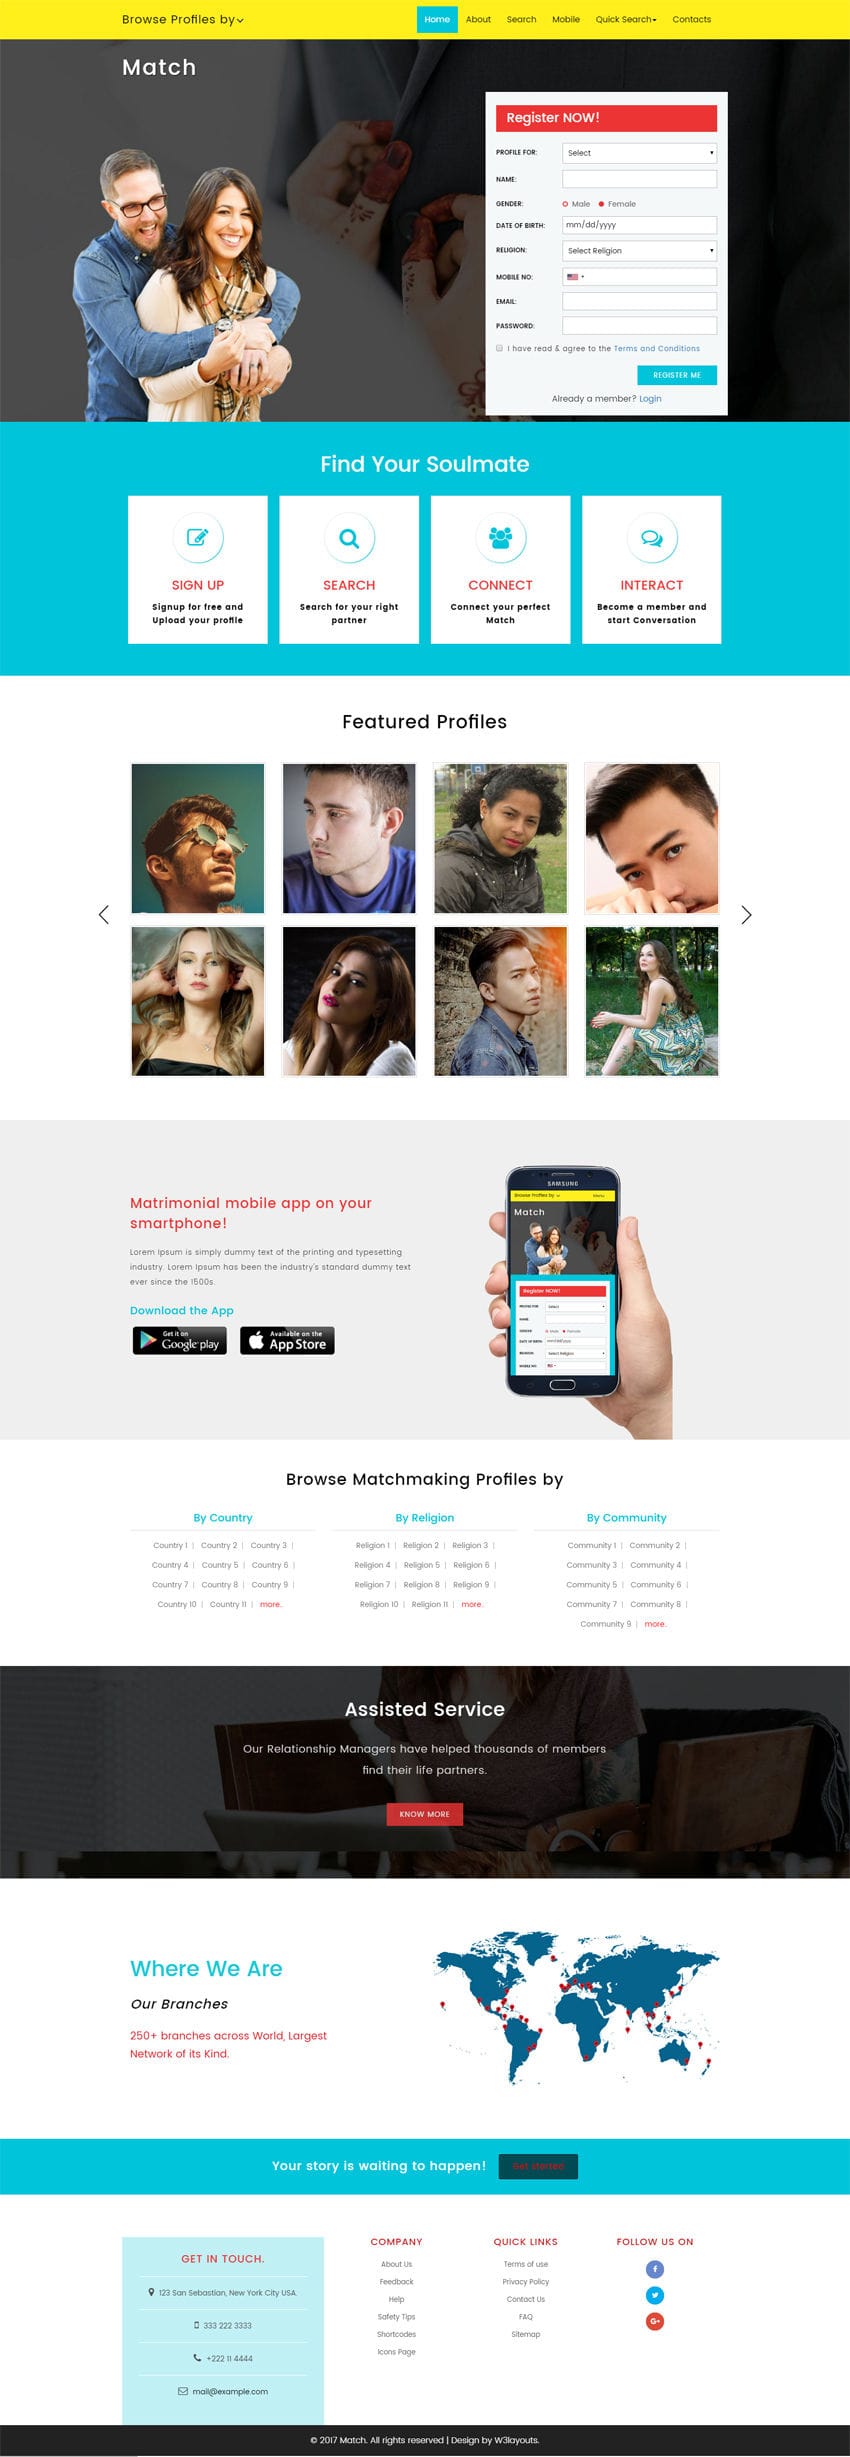 Match is a wedding category Bootstrap responsive website template. This free web template is built with HTML & CSS and best suits matrimonial websites.